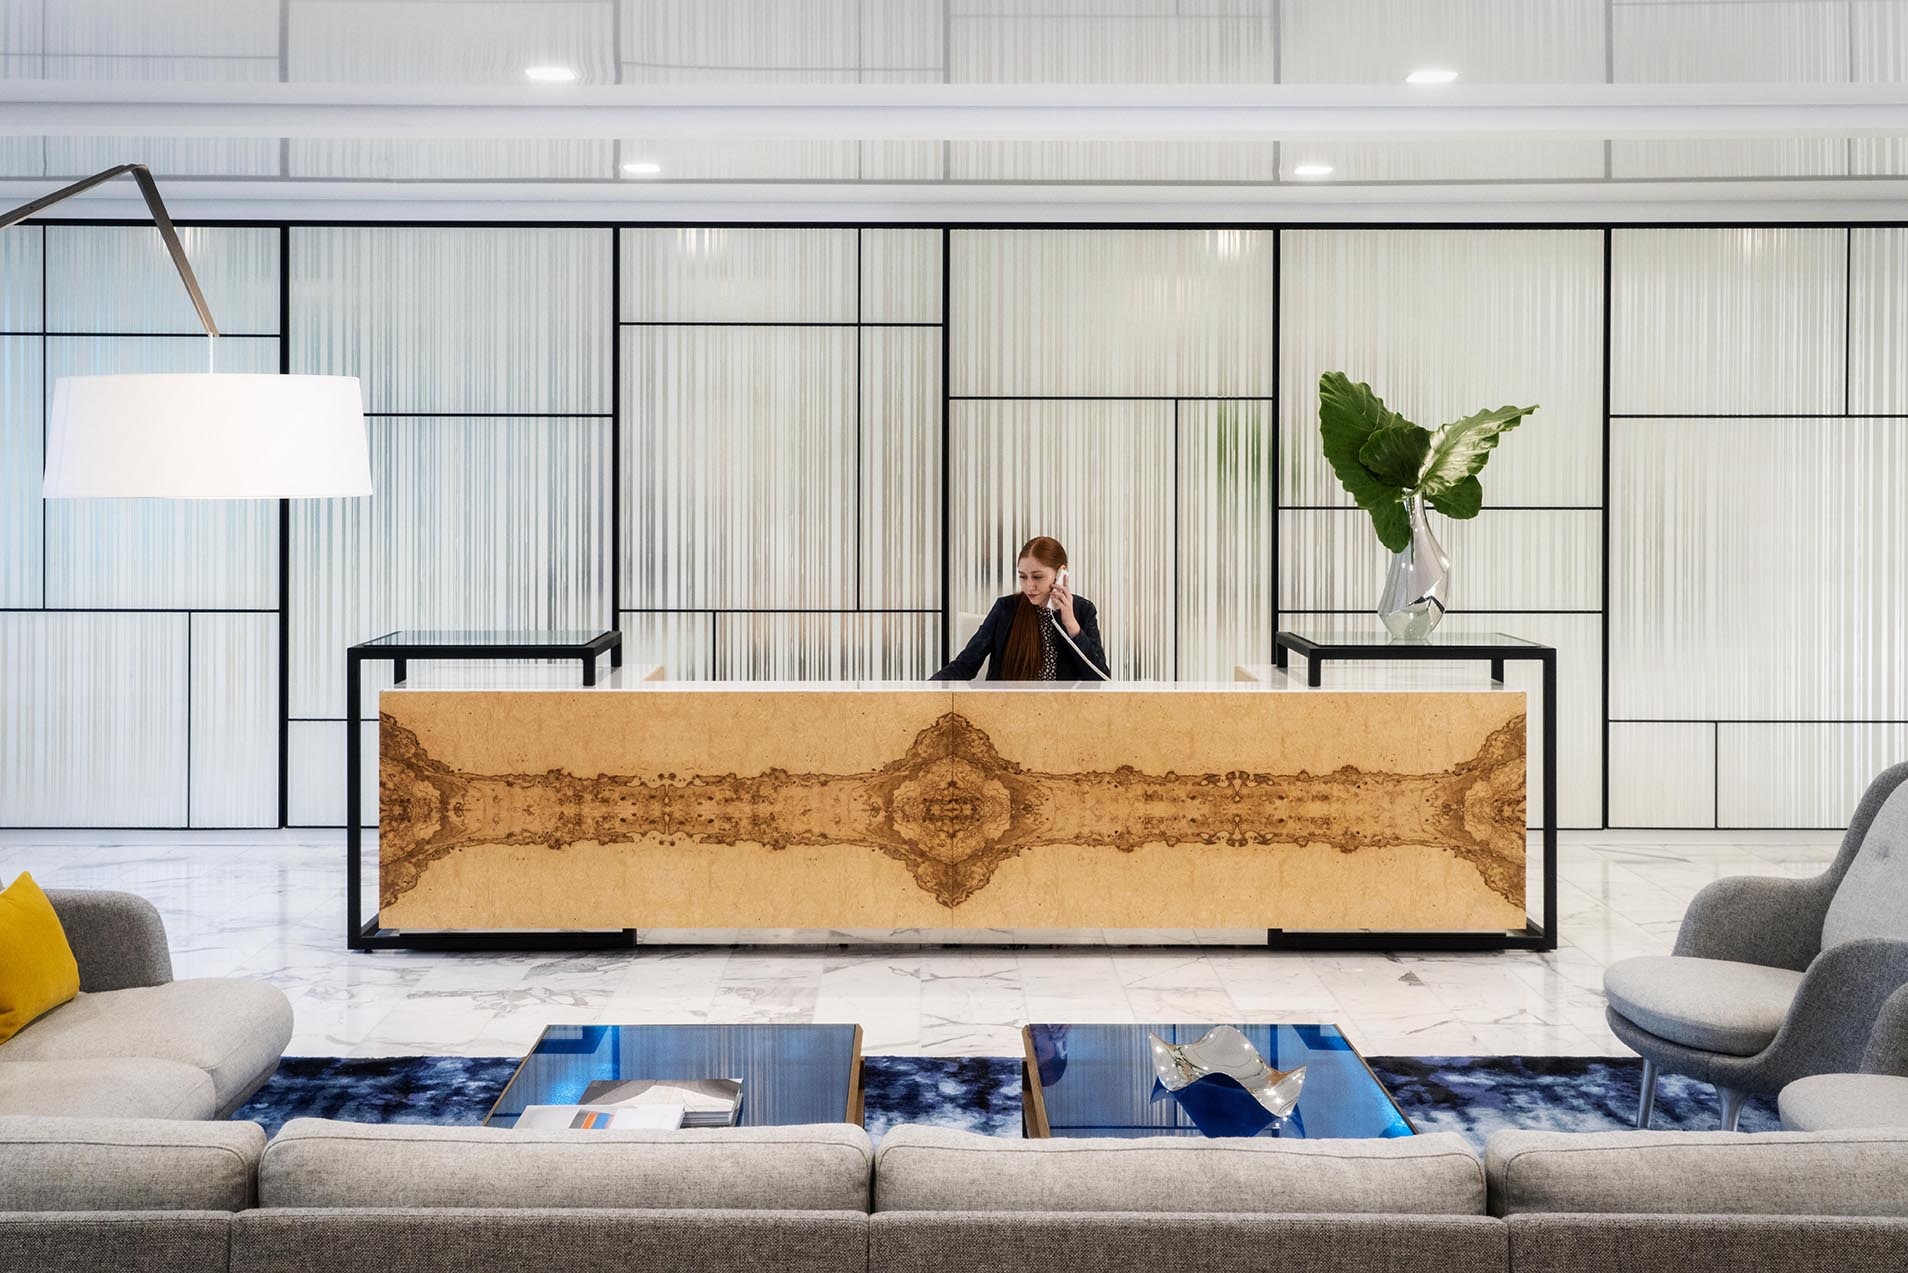 Photo of an office reception area with a wood desk and framed wakk